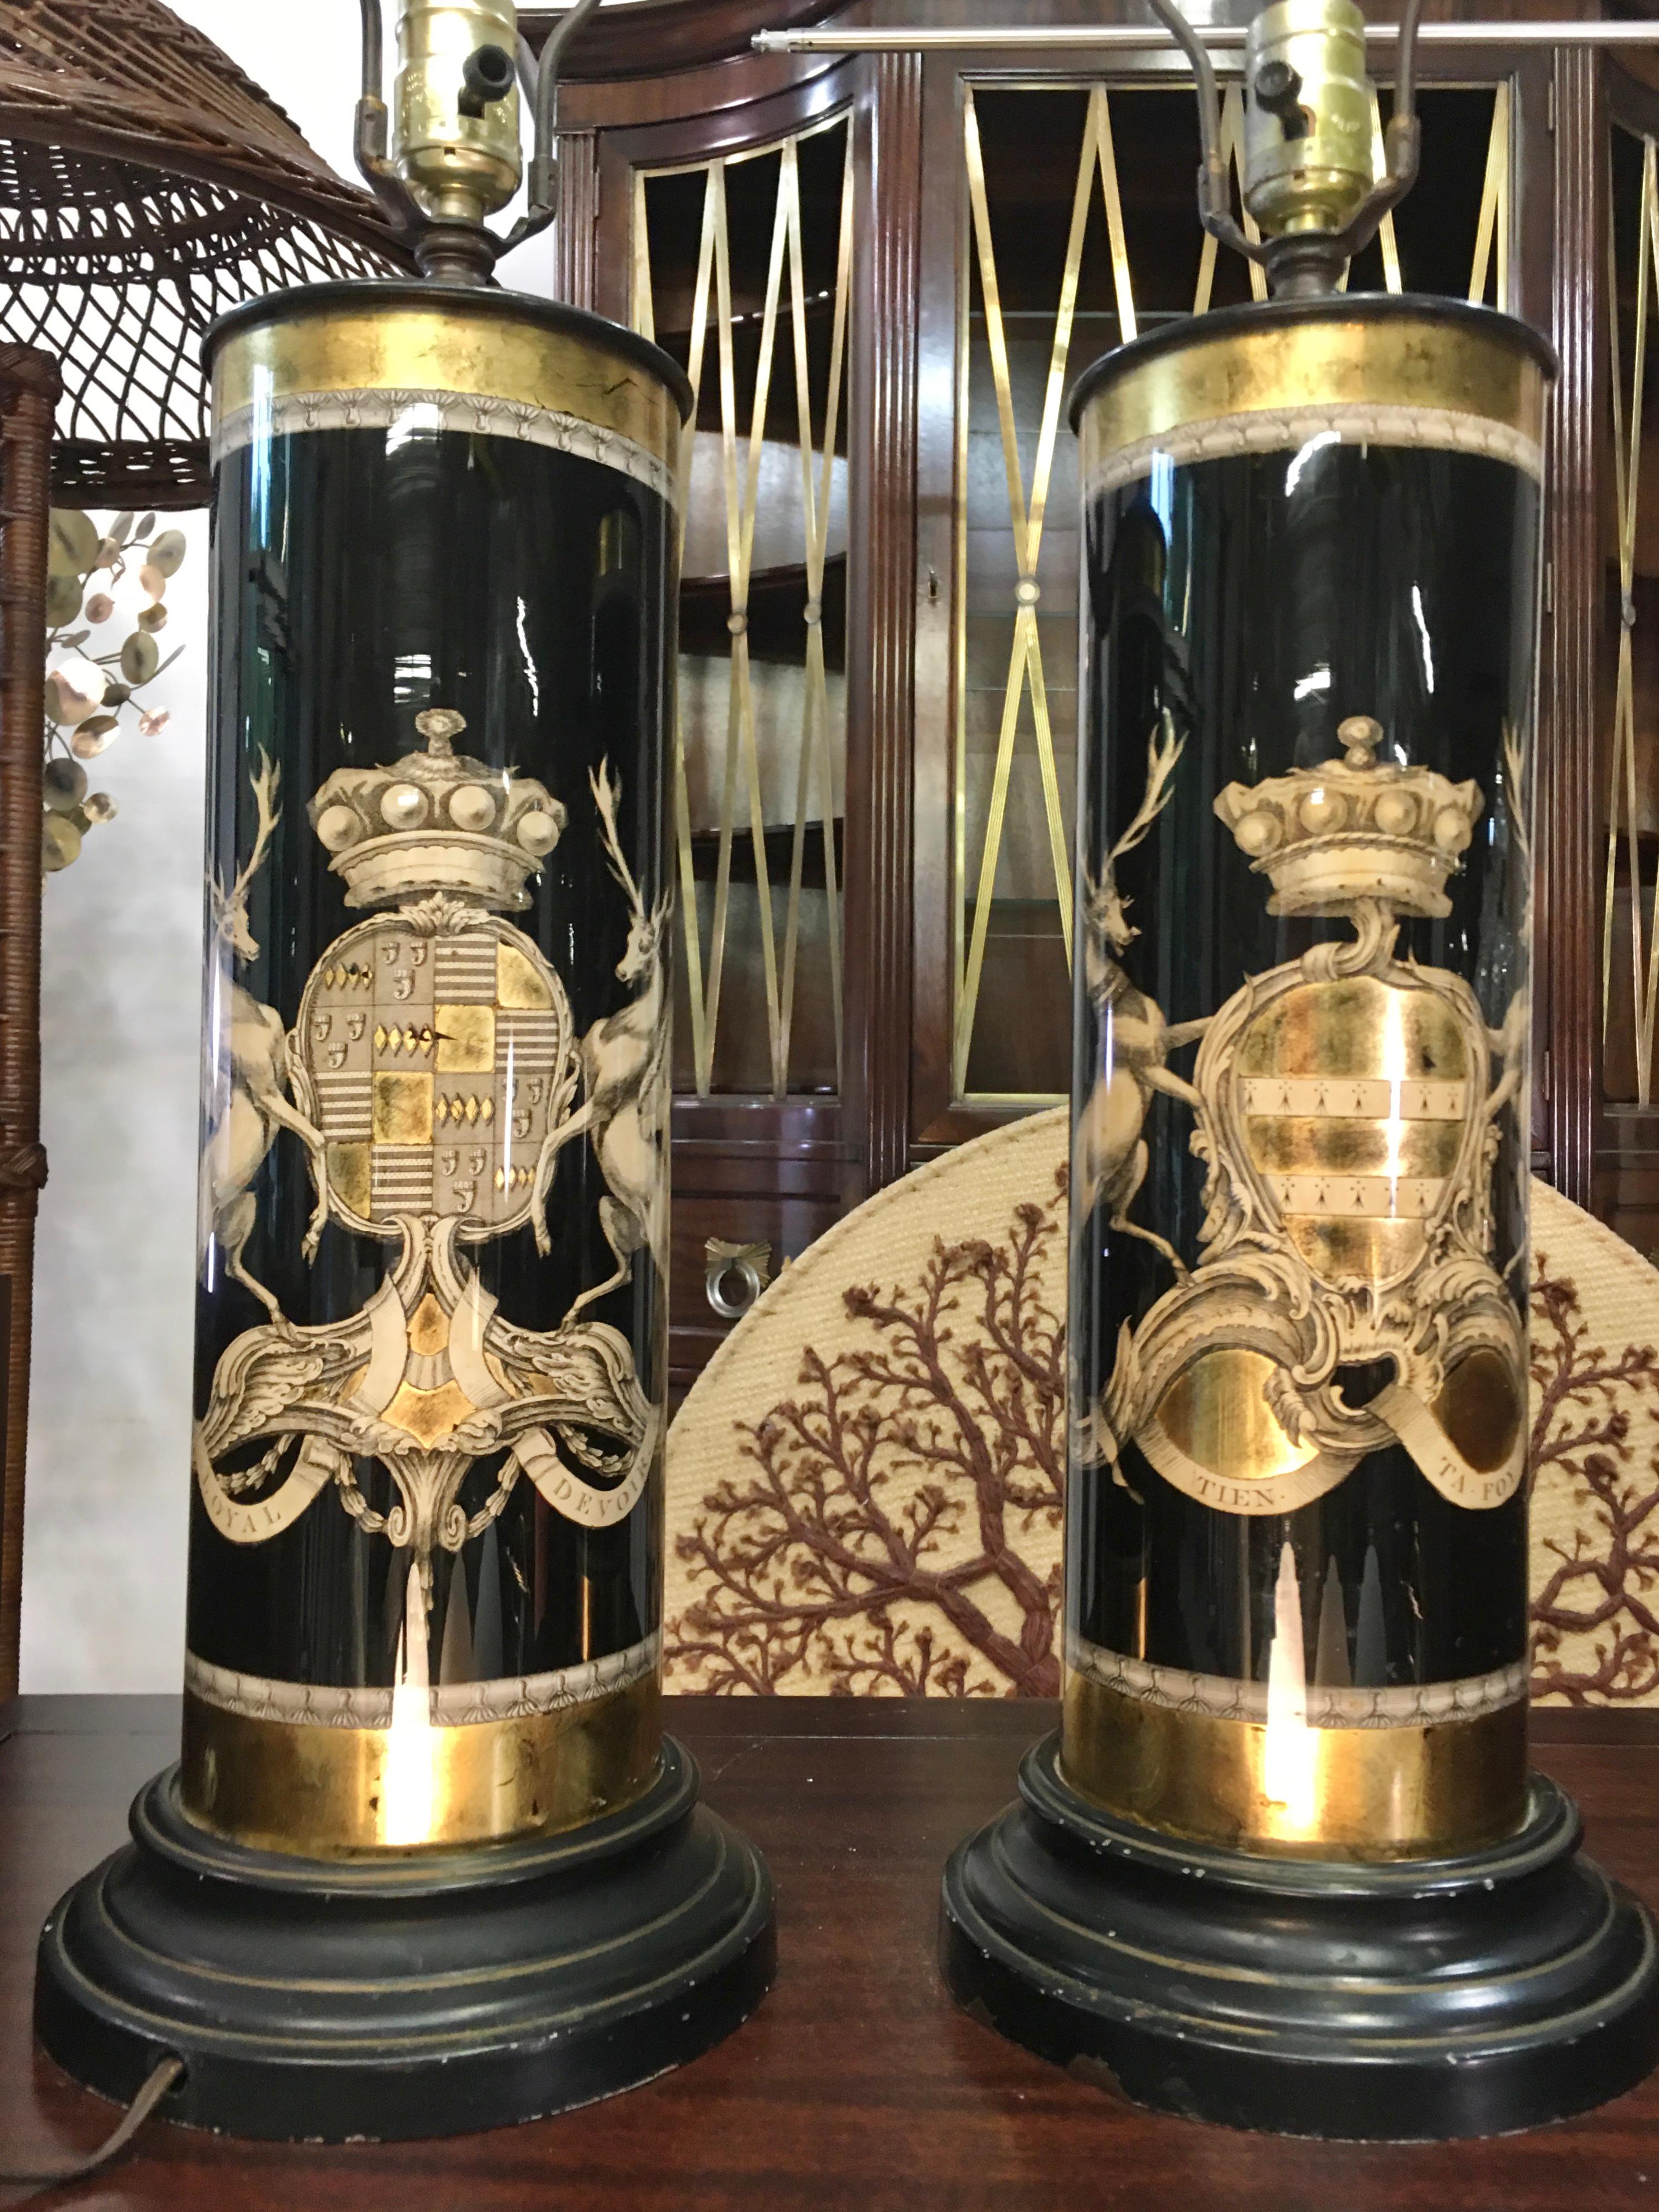 Pair of vintage reverse painted glass cylinder lamps, black and gilding, depicting the coats of arms of British aristocratic families of Bathurst and Granville.
The overall height from the base to the top of the finial is approximately 32.5 in. The